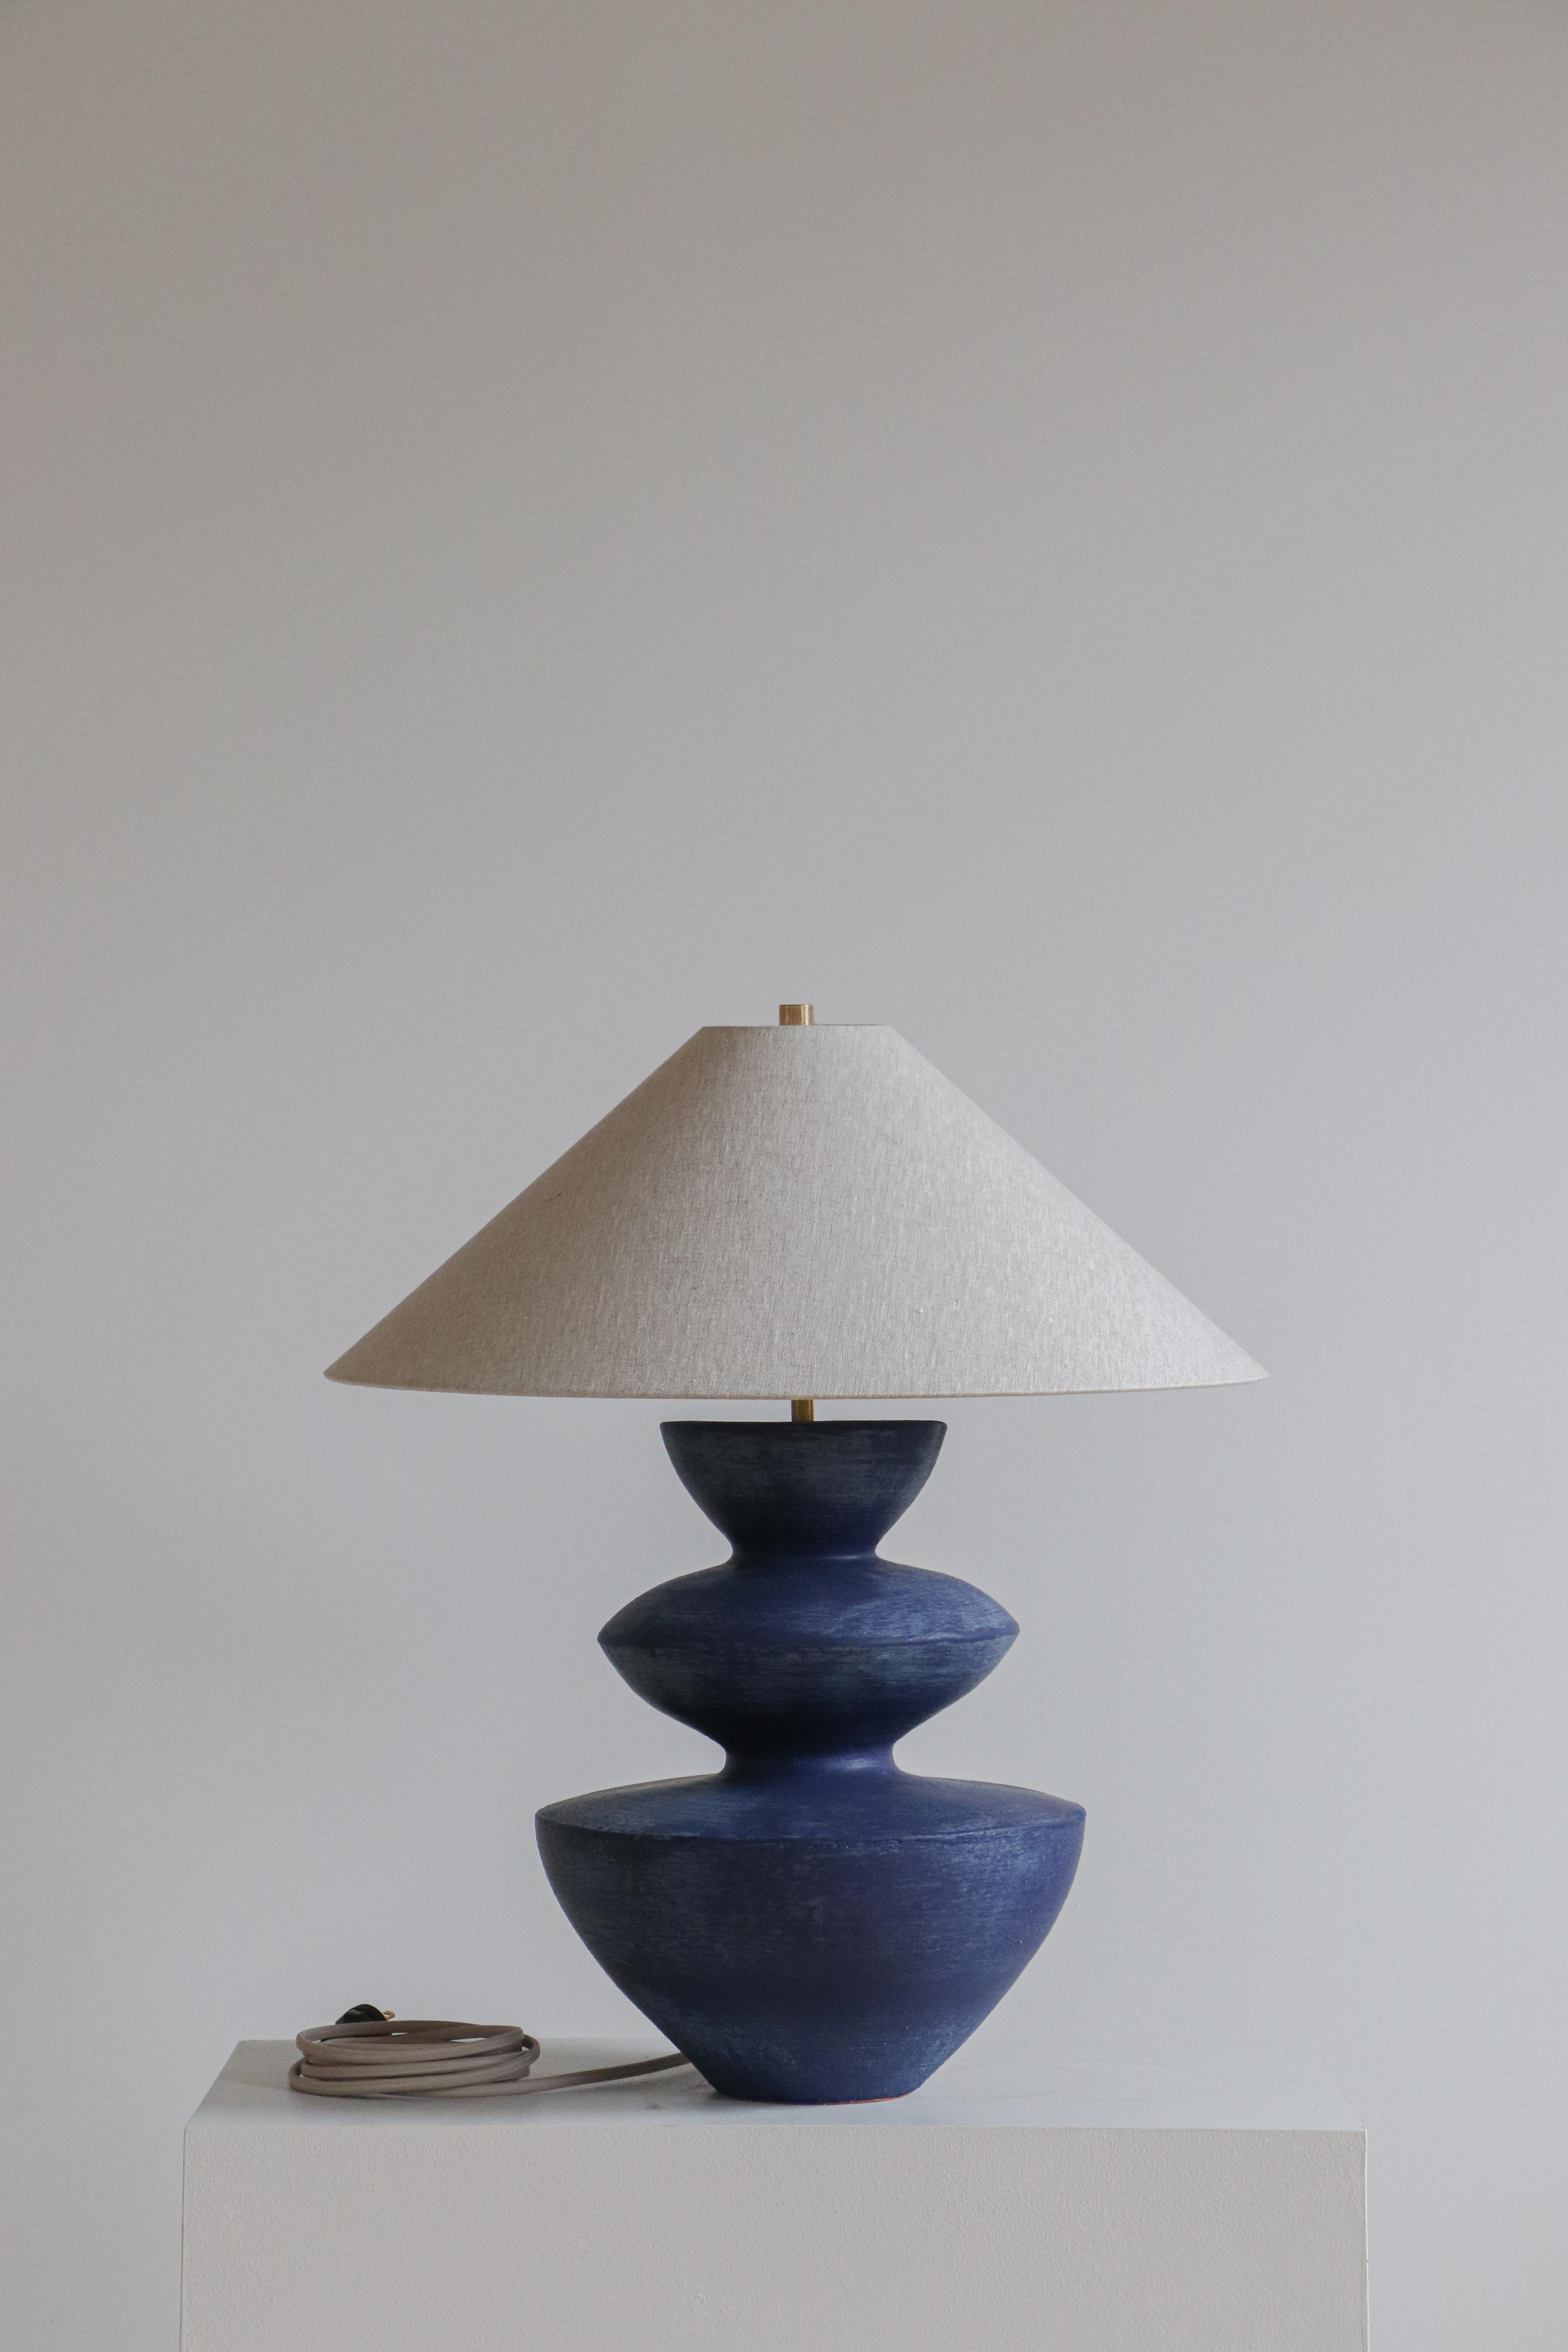 Lapis Janus Table Lamp by Danny Kaplan Studio
Dimensions: ⌀ 51 x H 59 cm
Materials: Glazed Ceramic, Unfinished Brass, Linen

This item is handmade, and may exhibit variability within the same piece. We do our best to maintain a consistent product,